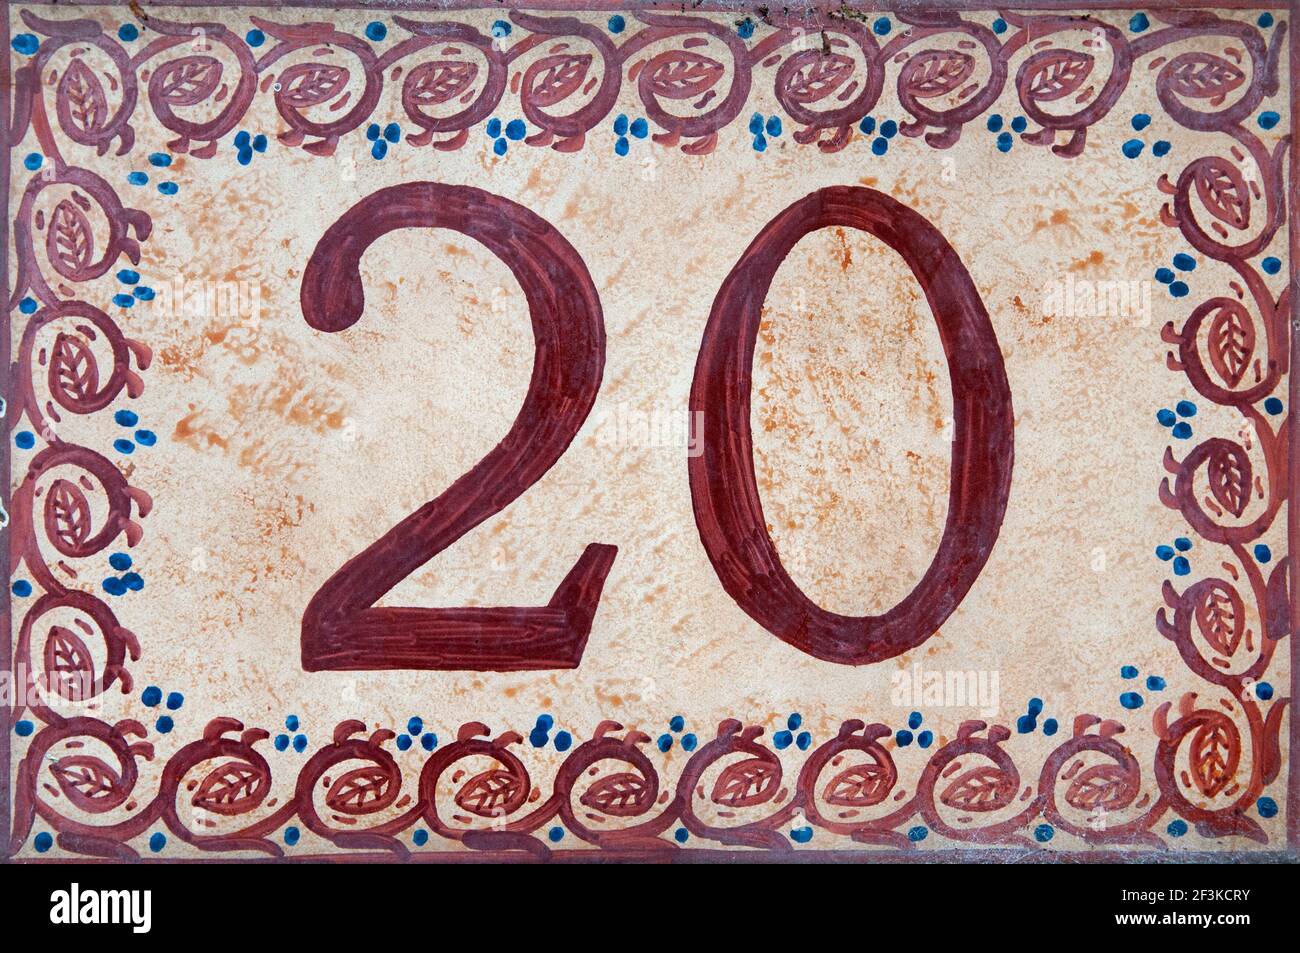 A Close Up Of The Number Twenty Hand Painted On To A Decorative Ceramic Tile Stock Photo